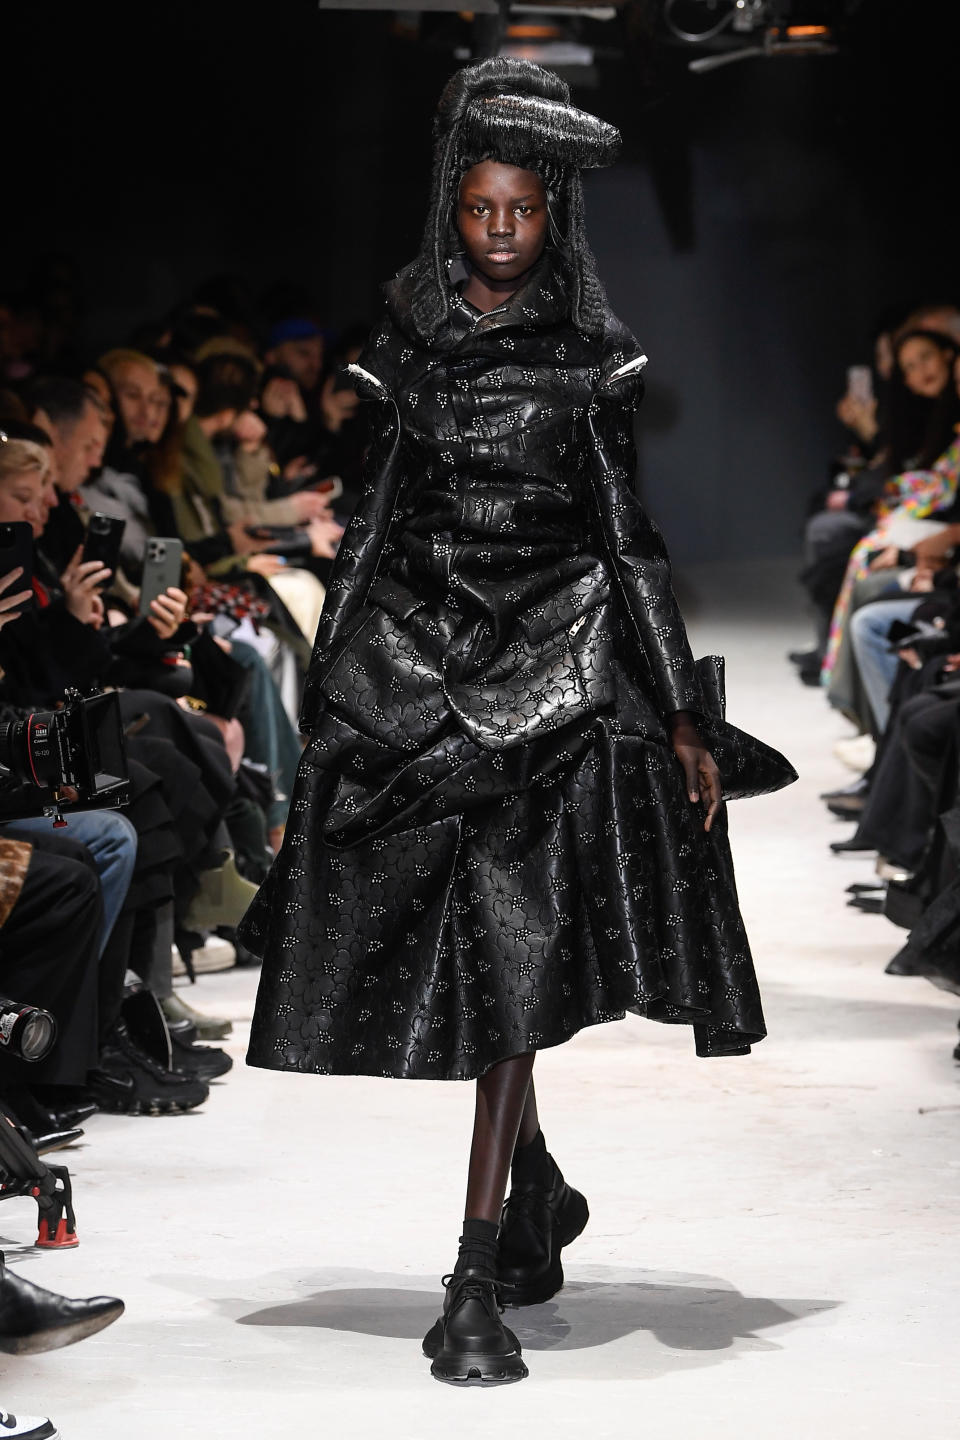 Model at Comme des Garçons fall 2024 show on March 2 in Paris.